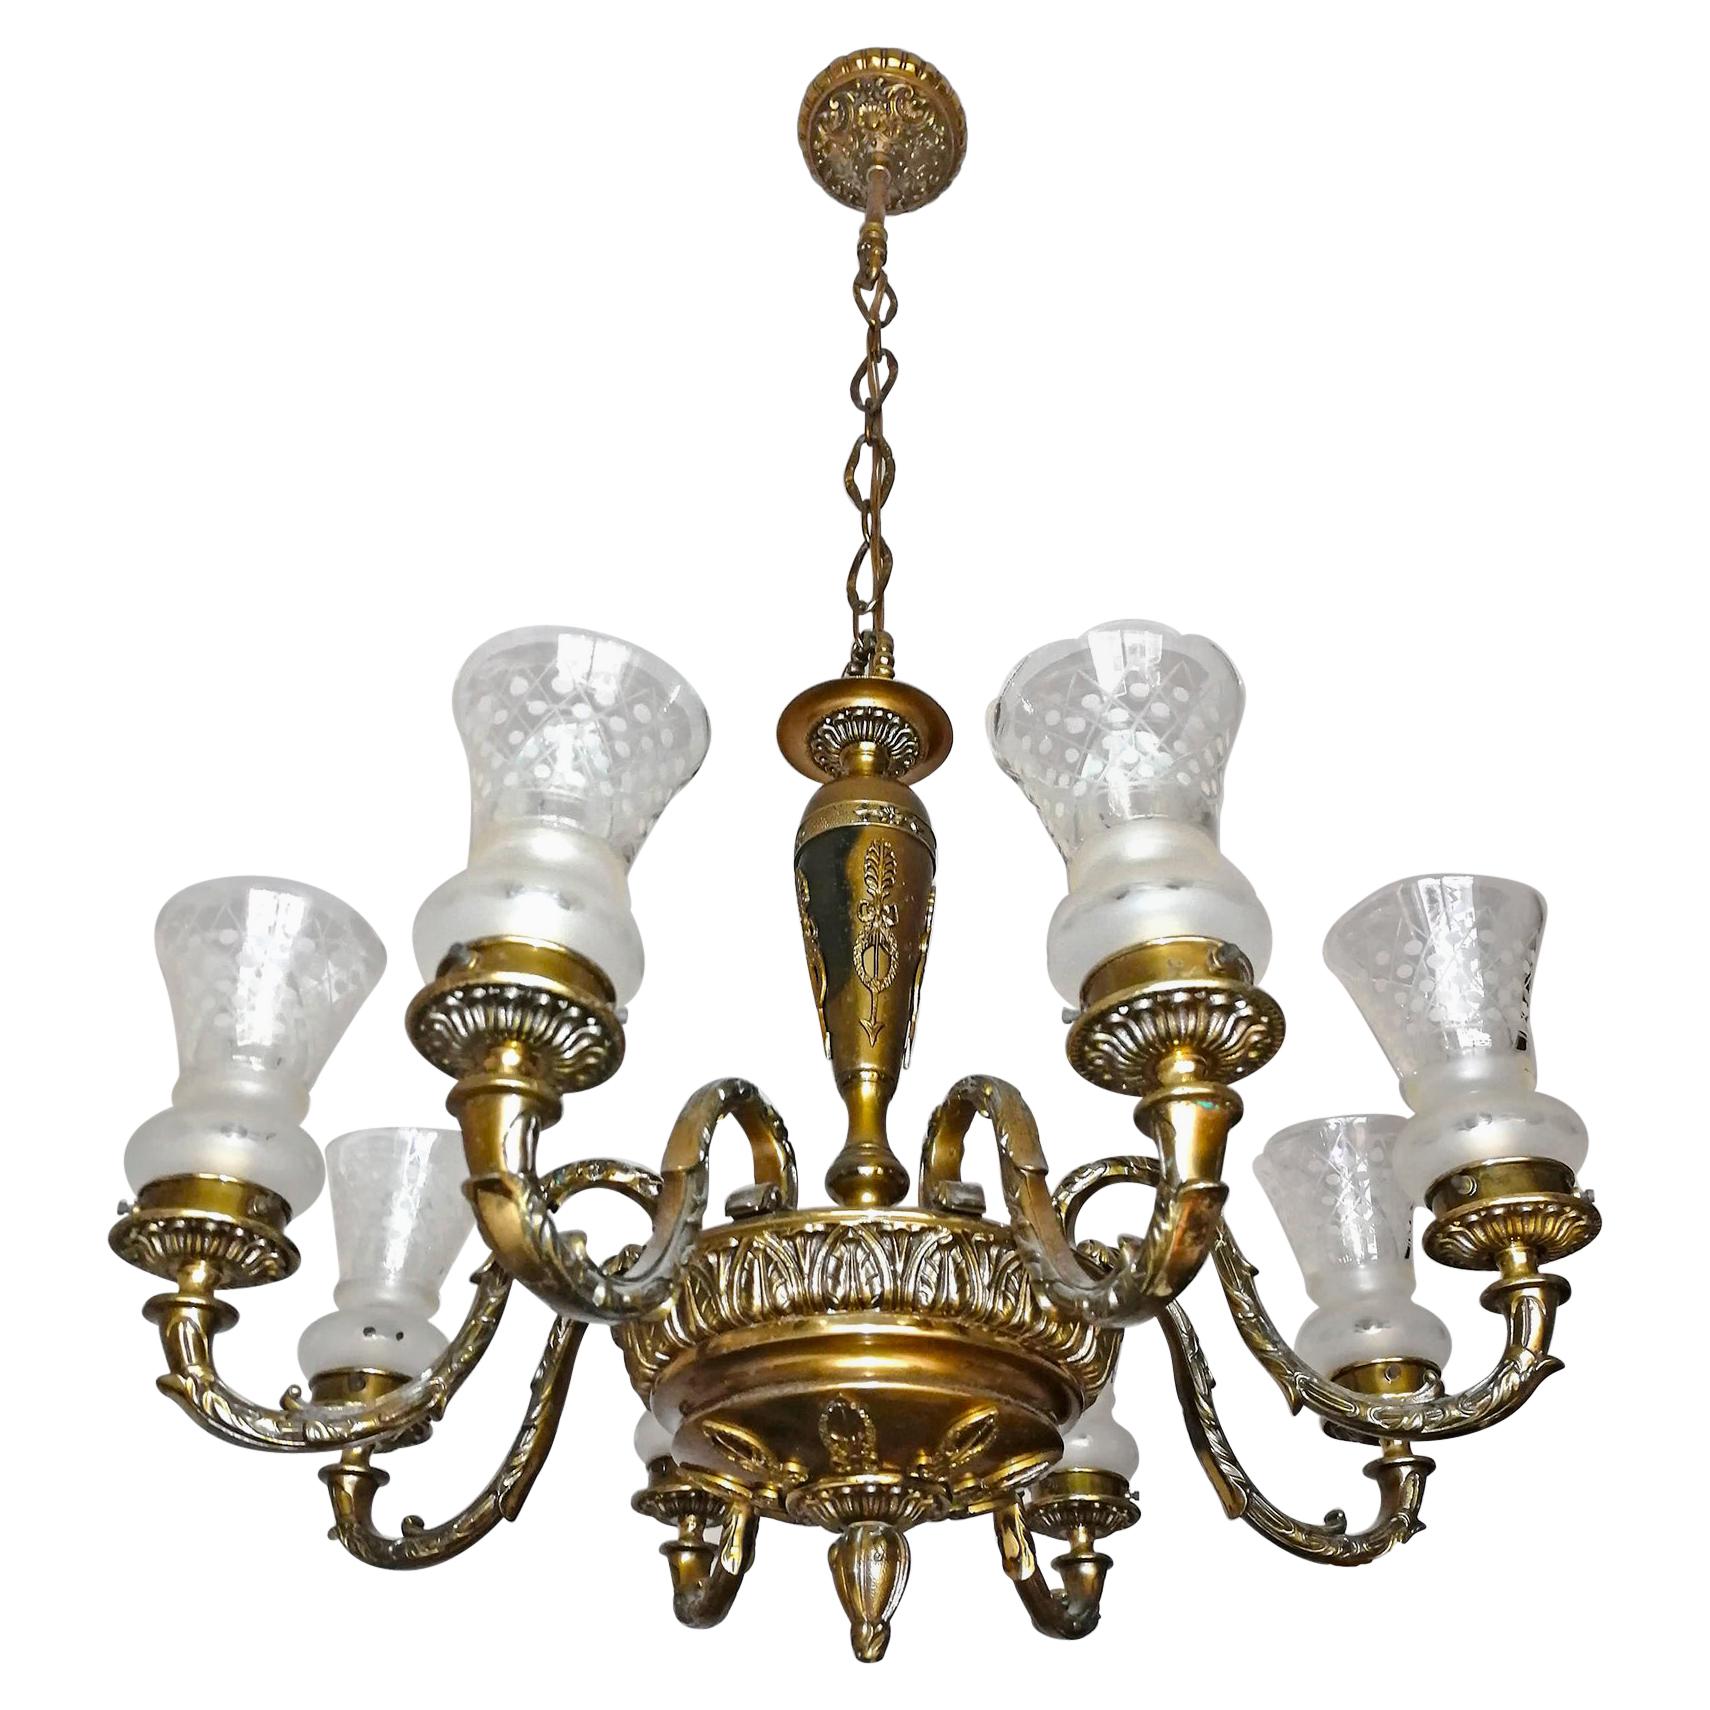 Antique French Empire Neoclassical Gilt Bronze Chandelier, Early 20th Century For Sale